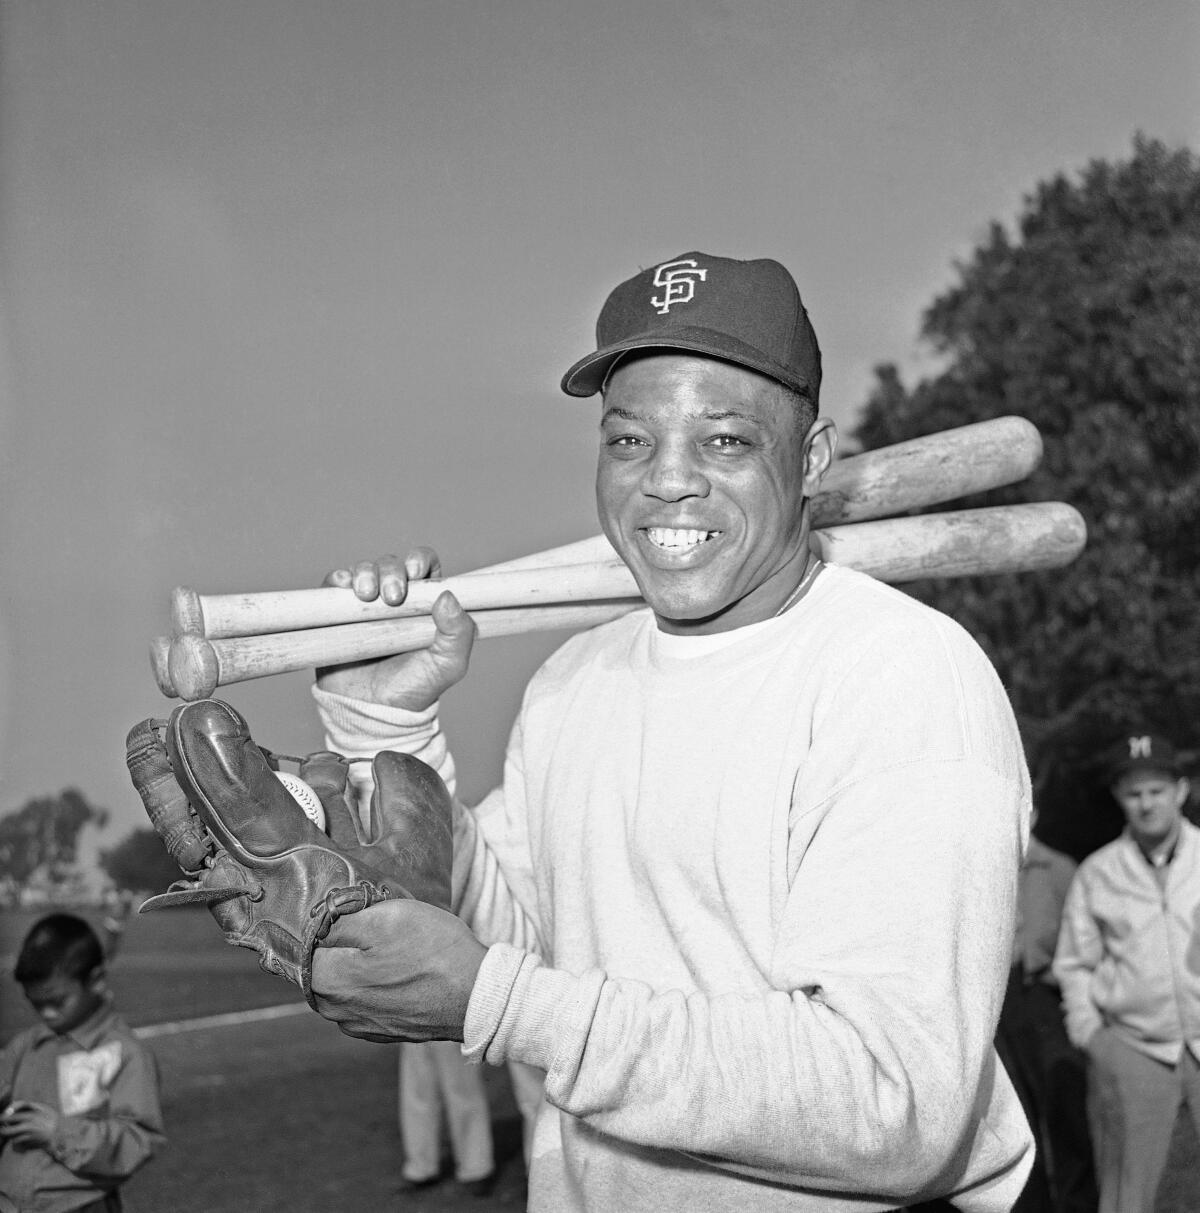 Willie Mays has a baseball glove on one hand and holds several bats in the other while smiling.